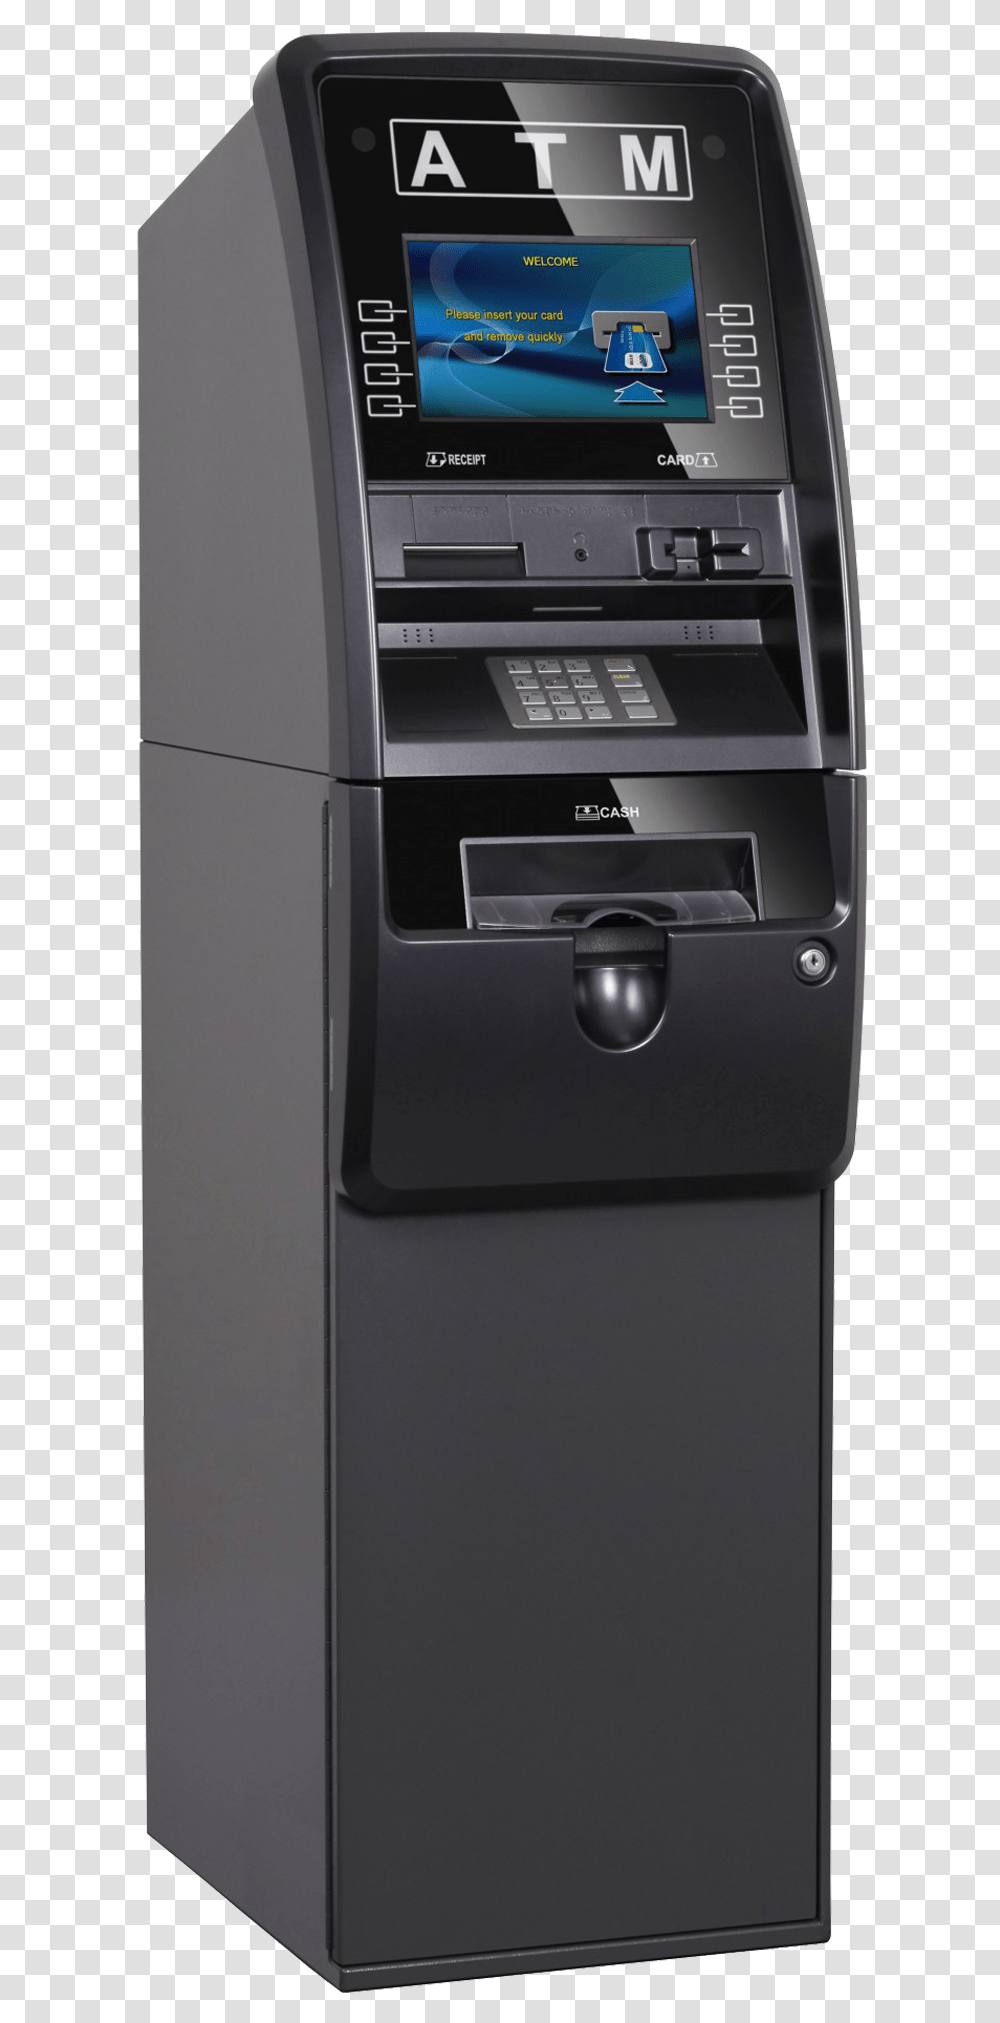 Genmega Onyx Atm From Empire Atm Group Empireatmgroup Genmega Onyx, Machine, Mobile Phone, Electronics, Cell Phone Transparent Png